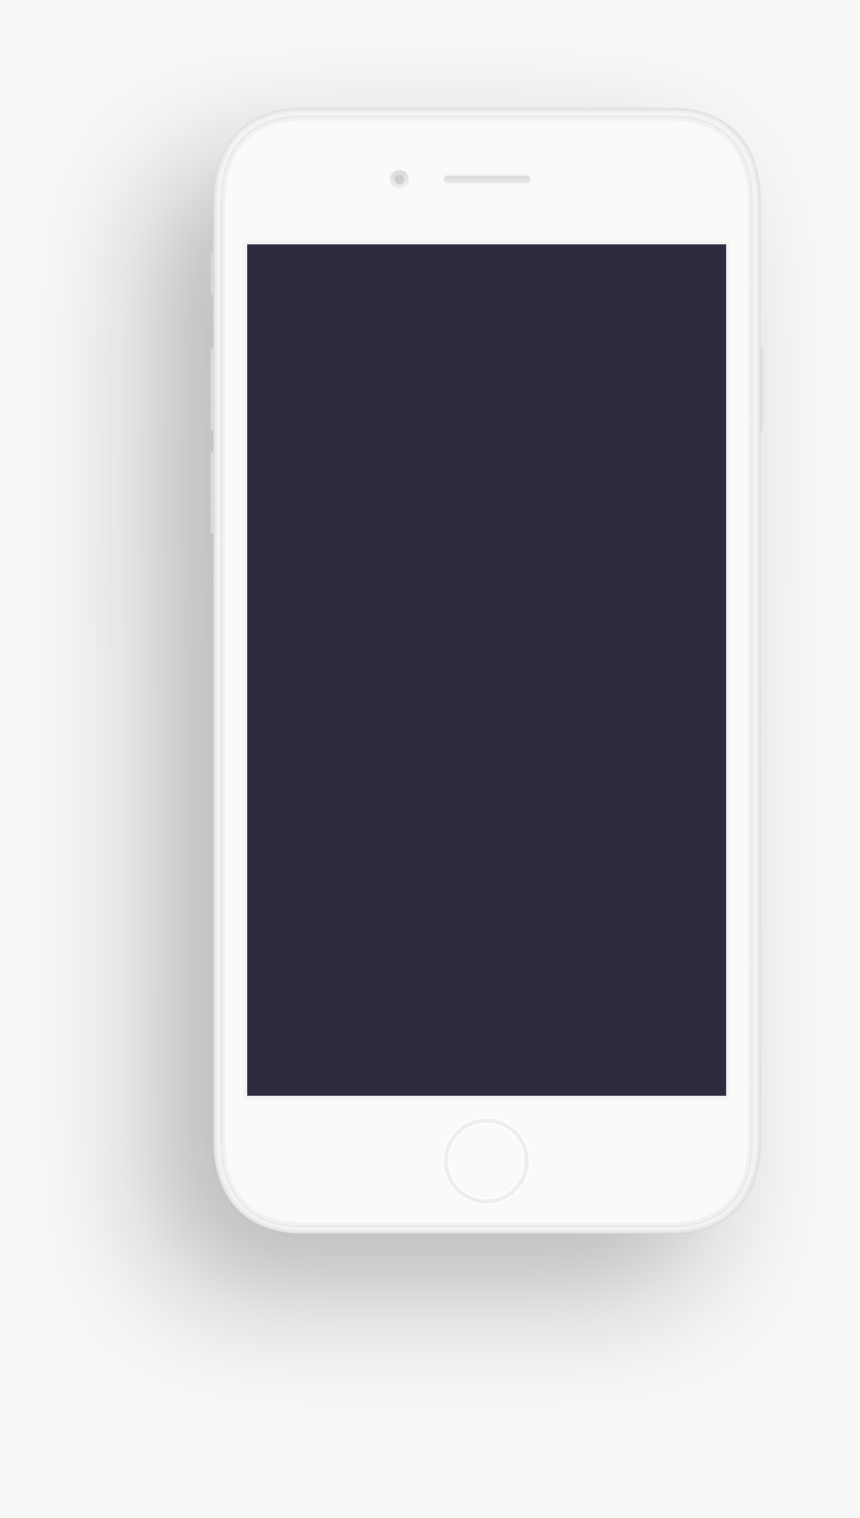 Mobile Phone Outline - Smartphone, HD Png Download, Free Download